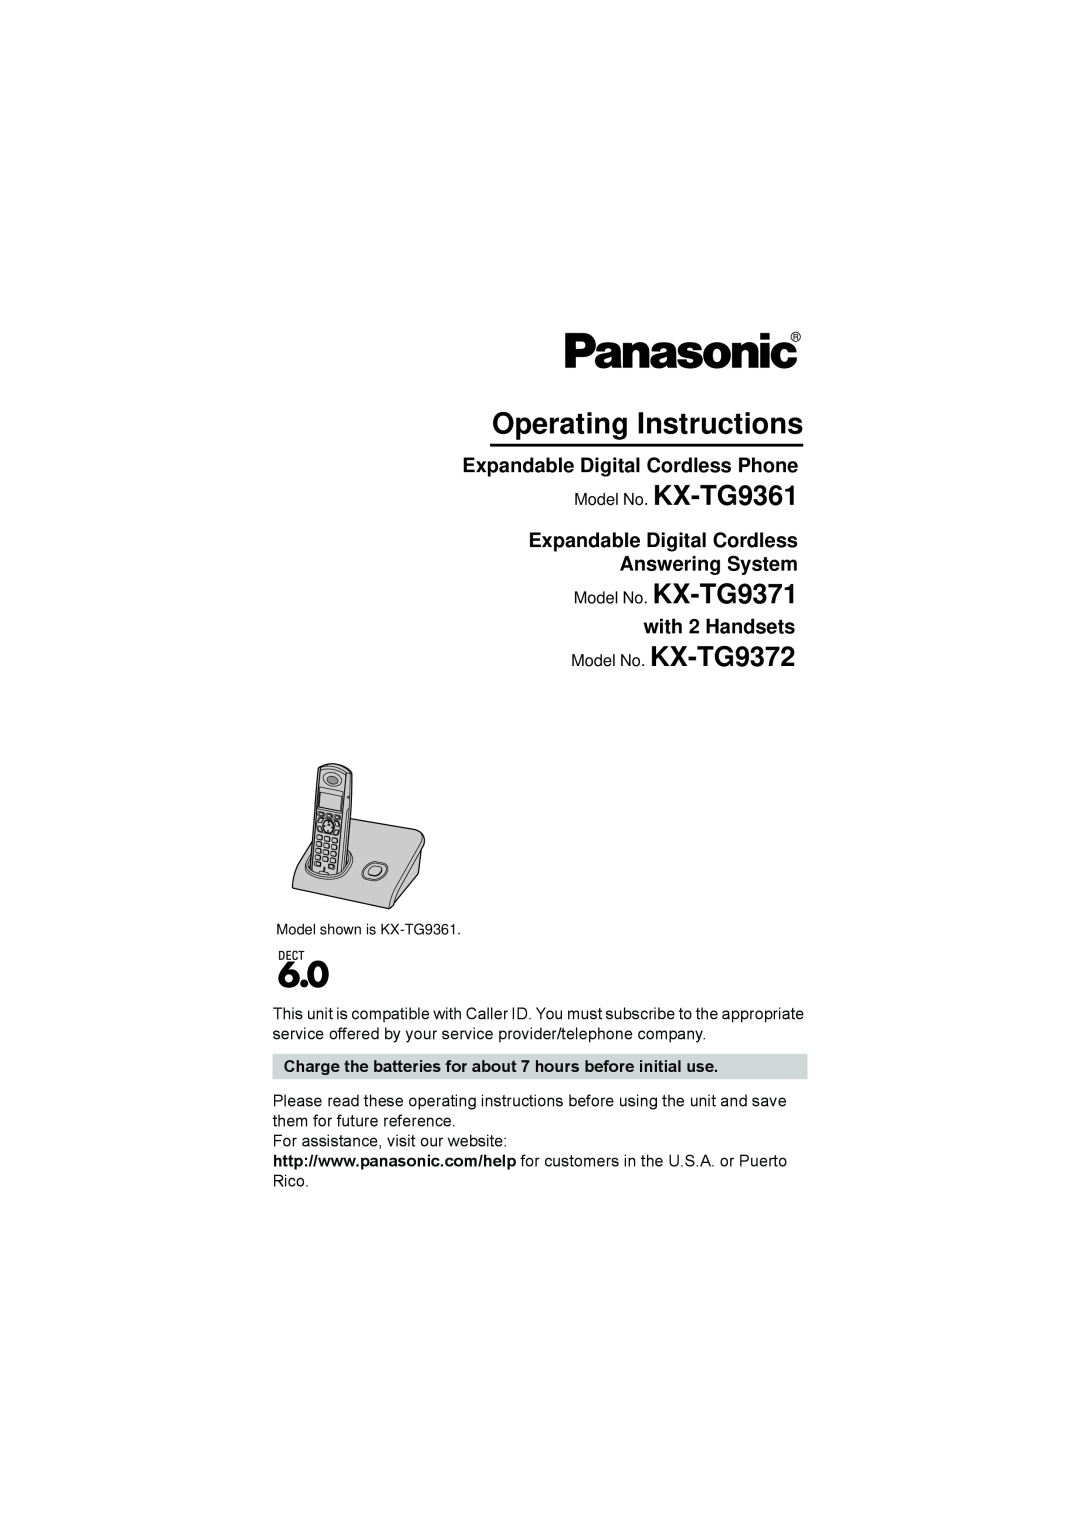 Panasonic KX-TG9372 operating instructions Charge the batteries for about 7 hours before initial use, with 2 Handsets 